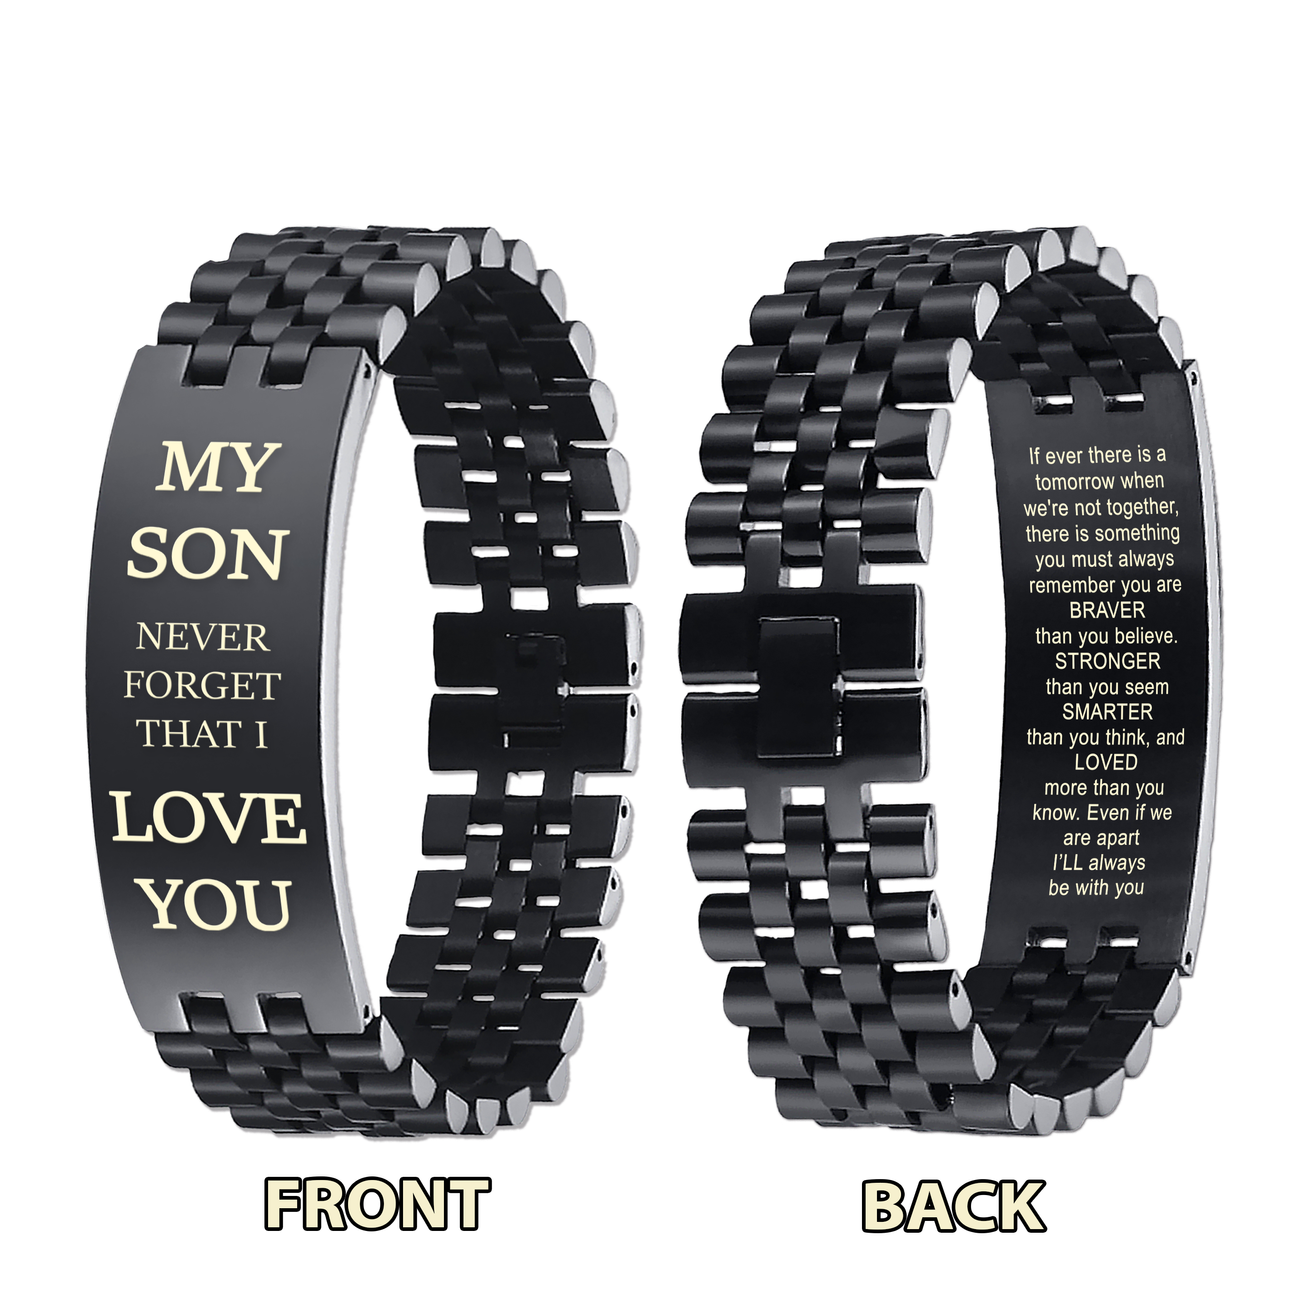 Family Bracelet Double Sided My Son Never Forget That I Love You, Never Lose